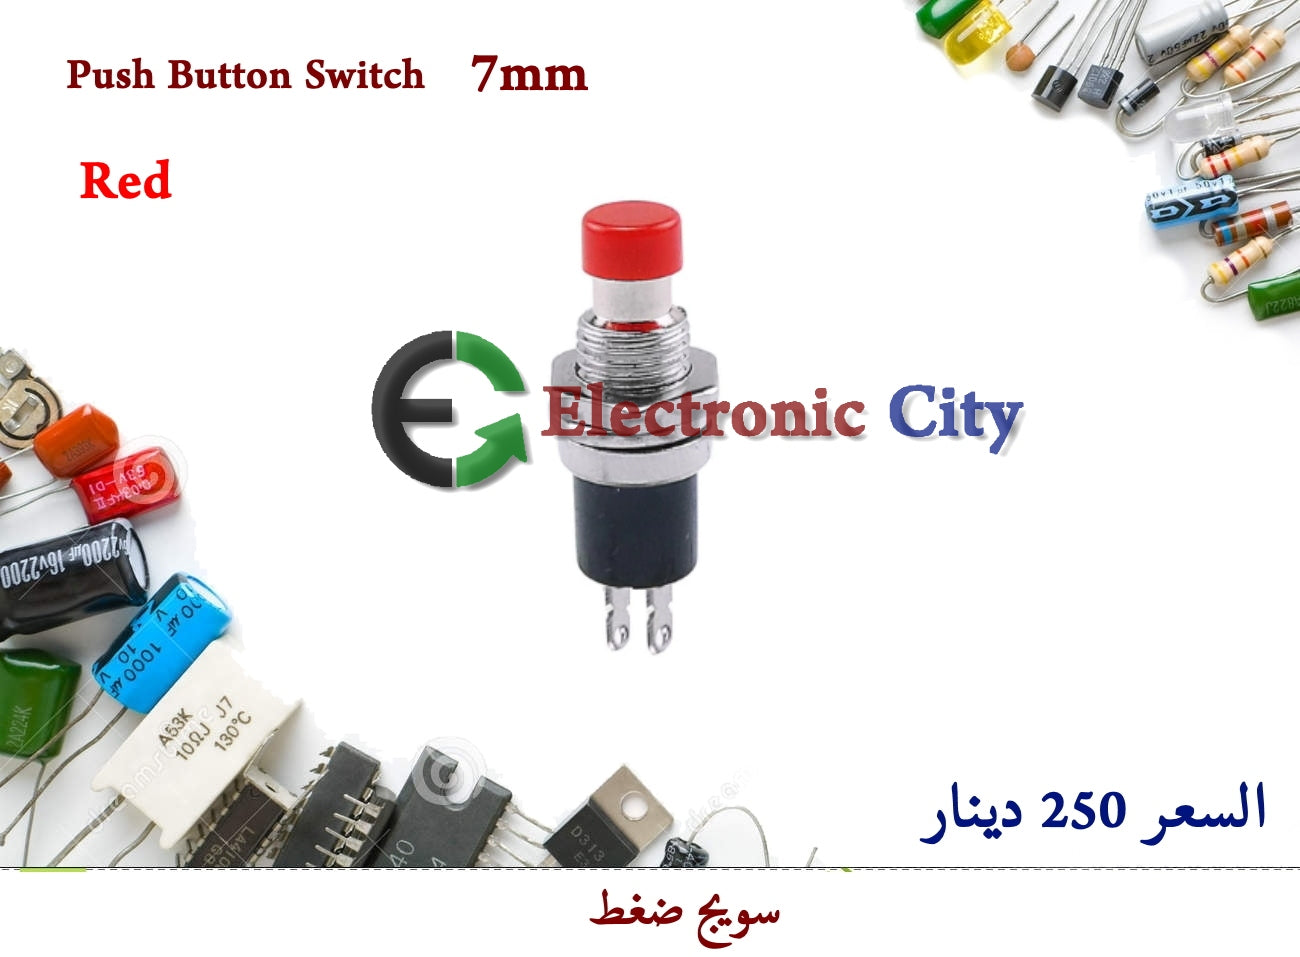 Push Button Switch 7mm Red